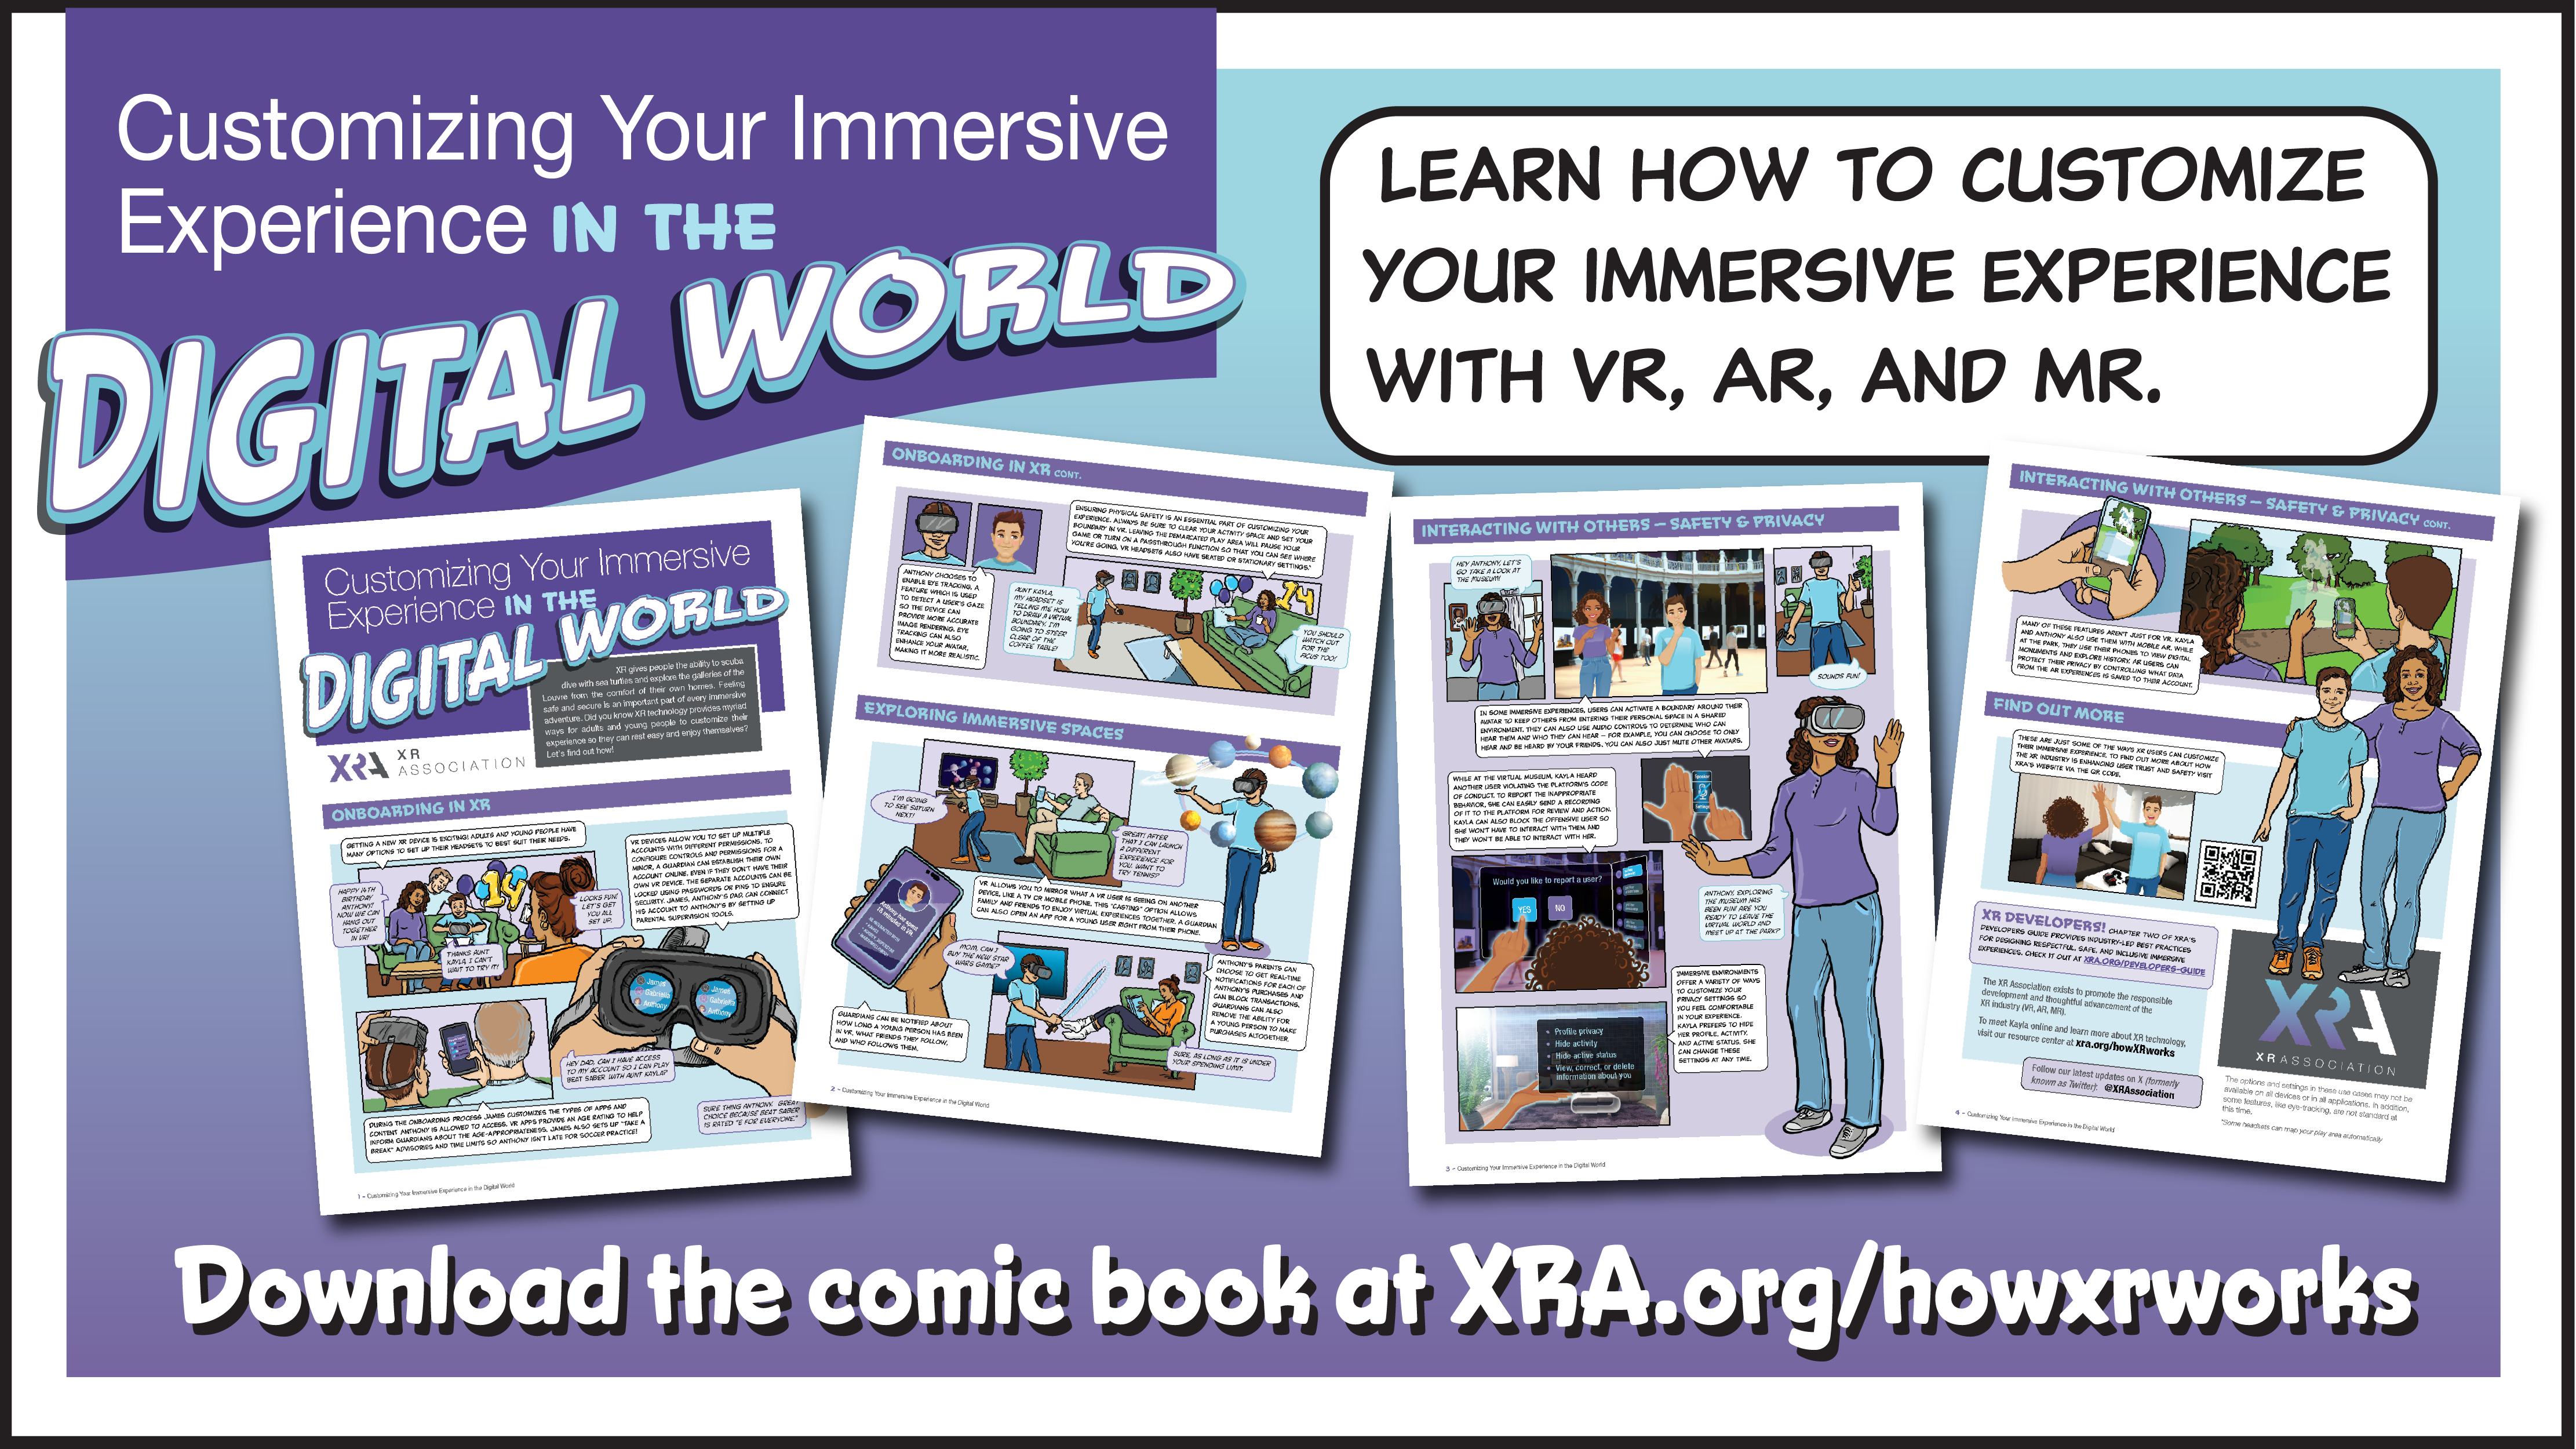 XR ASSOCIATION RELEASES SECOND EDITION OF ILLUSTRATIVE ON IMMERSIVE TECHNOLOGY